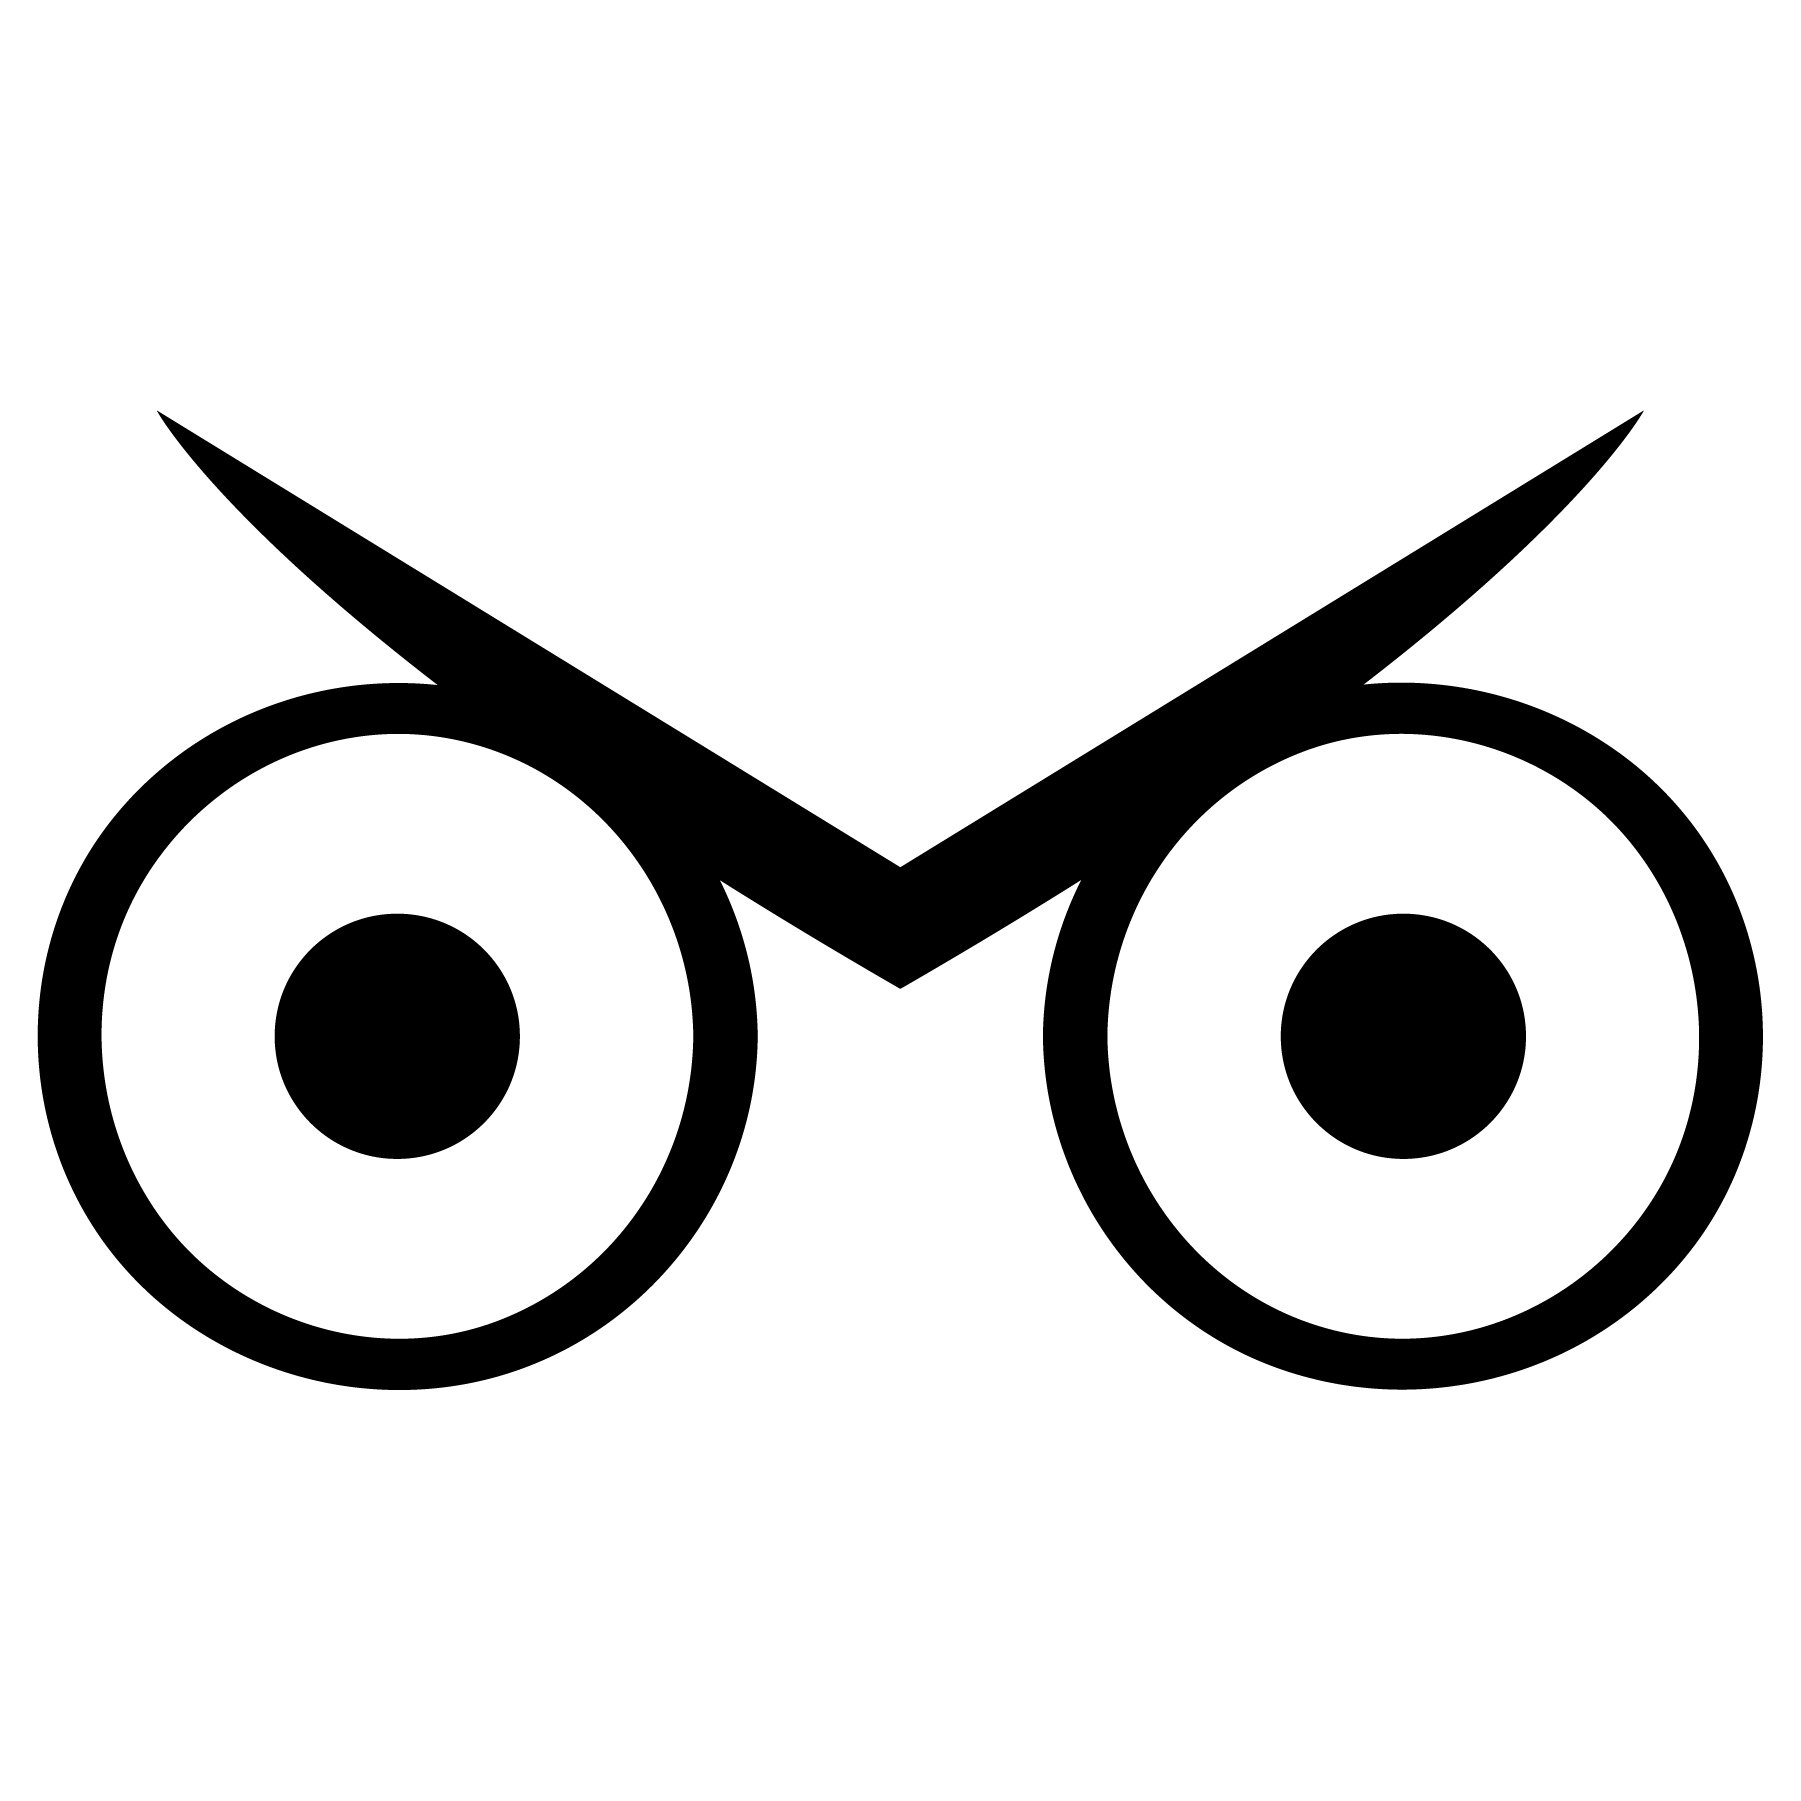 Angry Eyes Svg